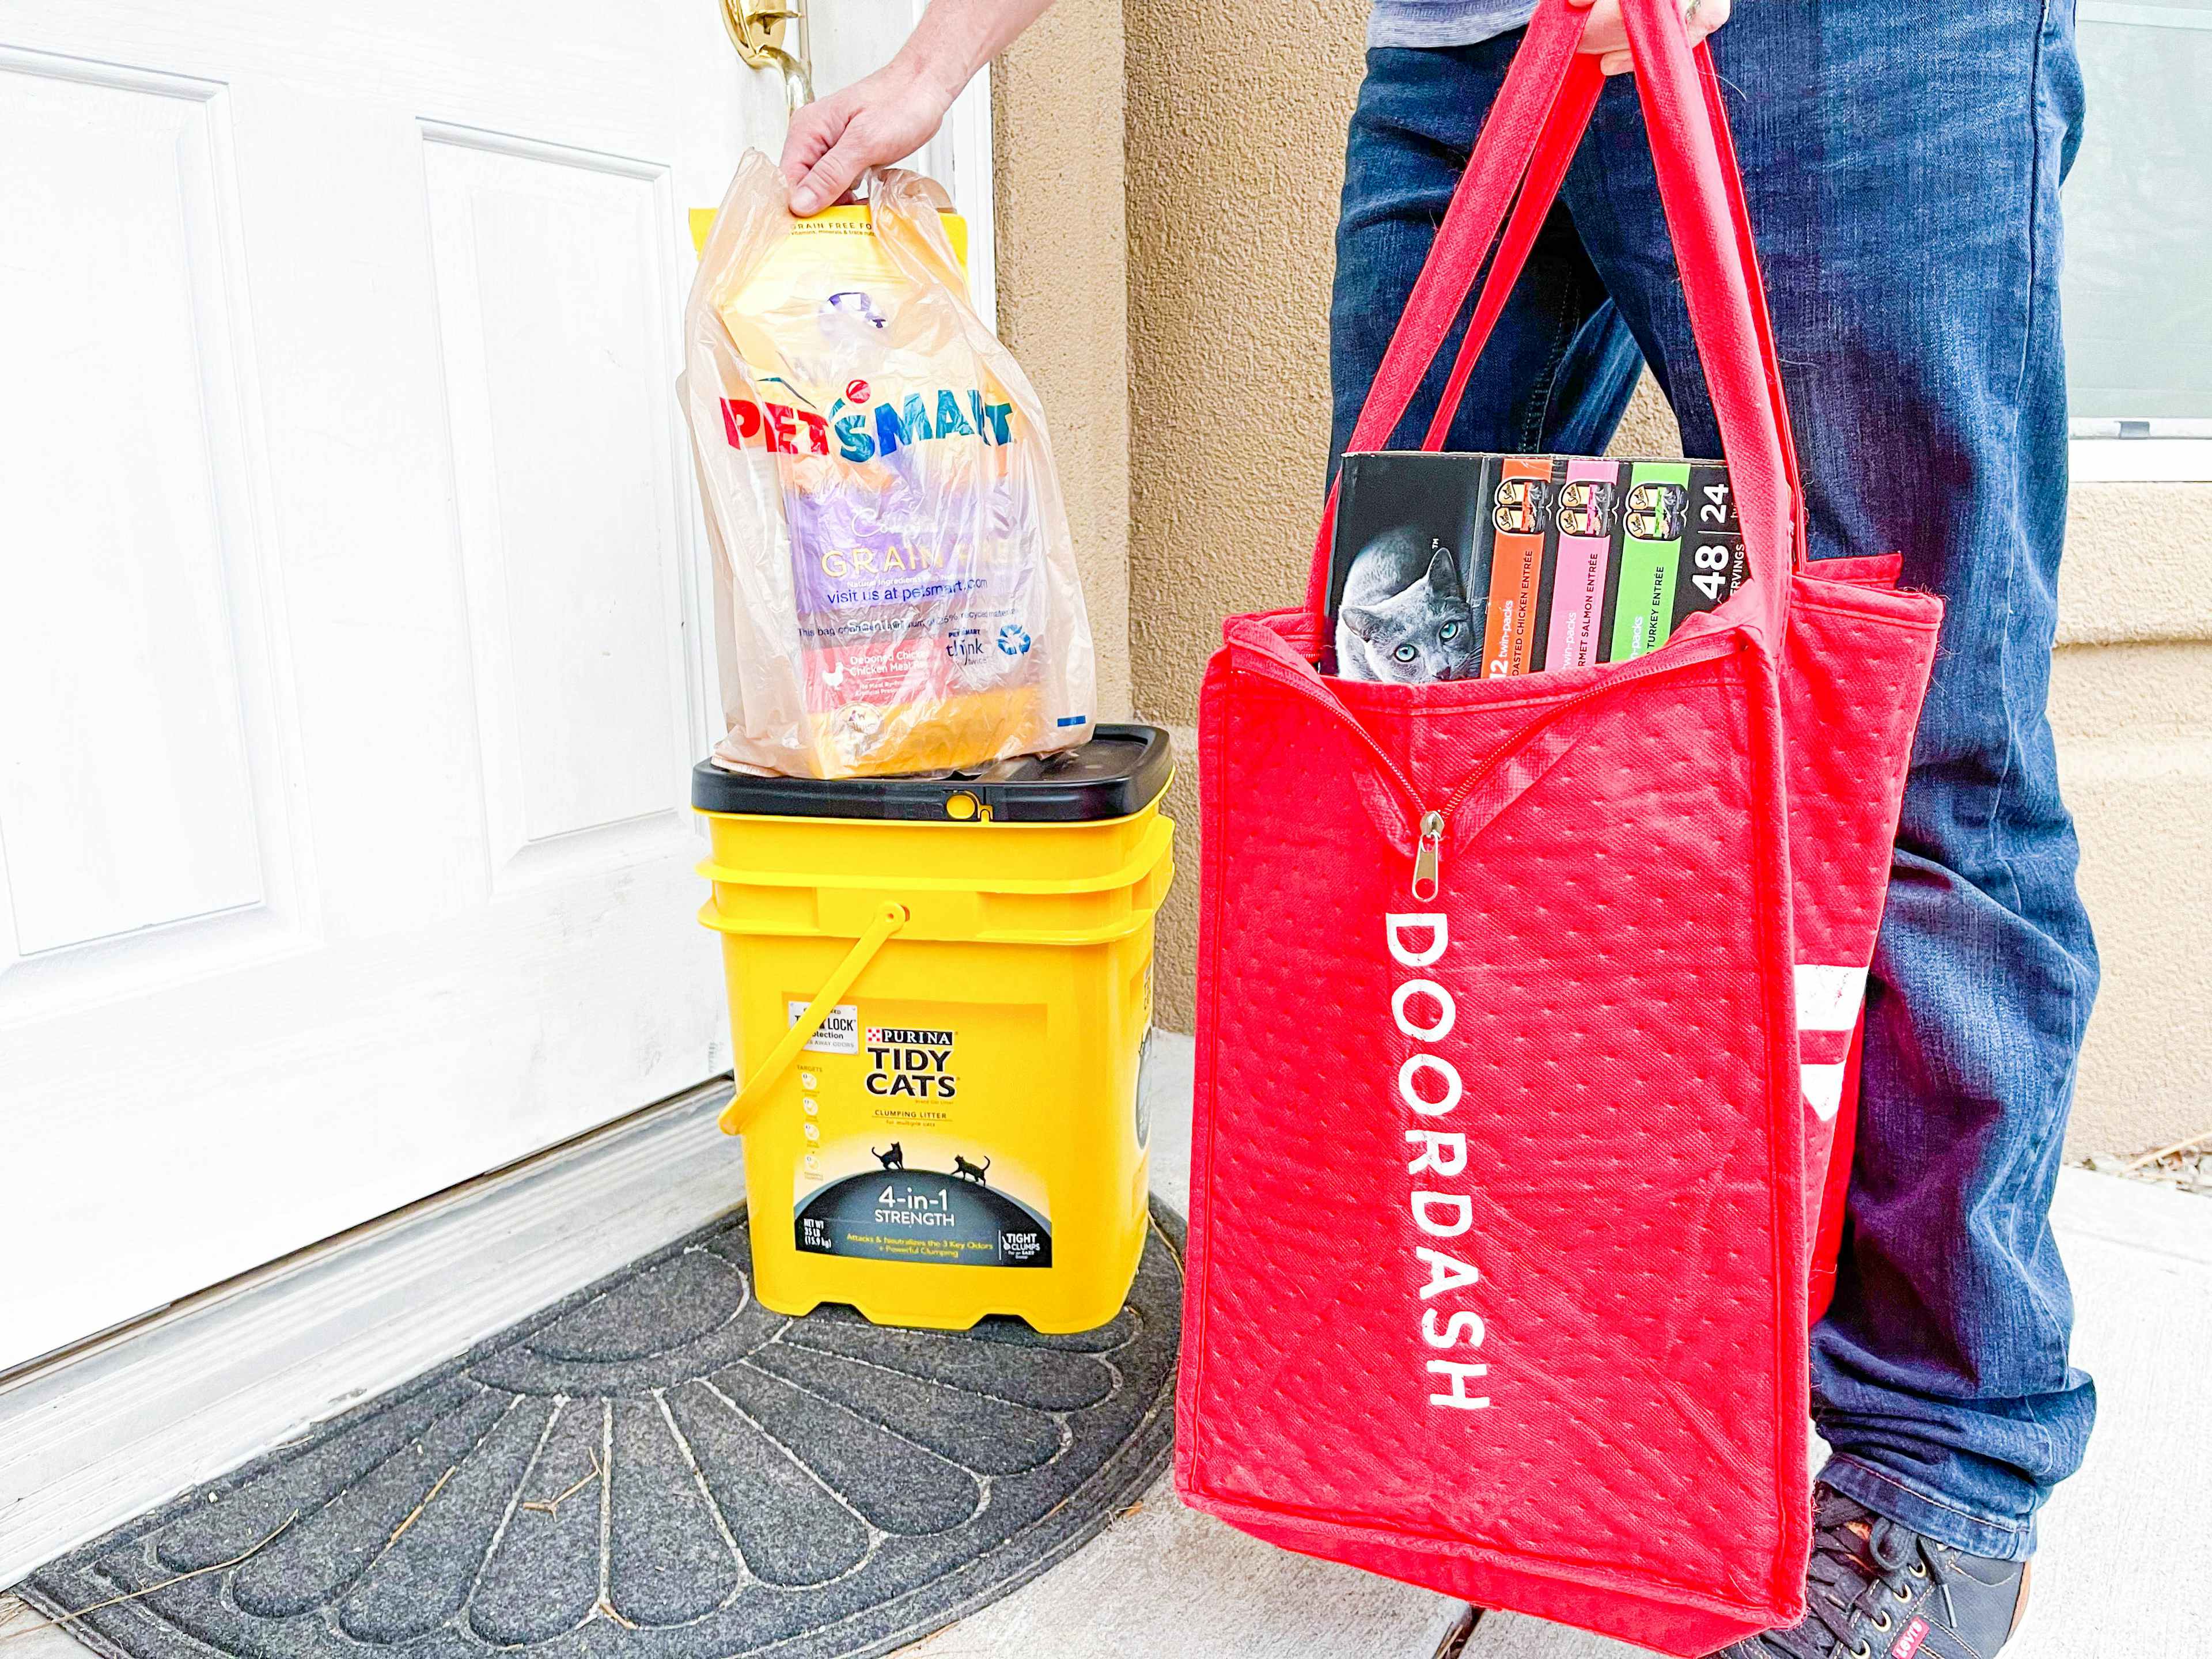 A Doordash delivery person standing on a front porch, setting a PetSmart bag onto a box of Tidy Cat kitty litter and holding a large Door...